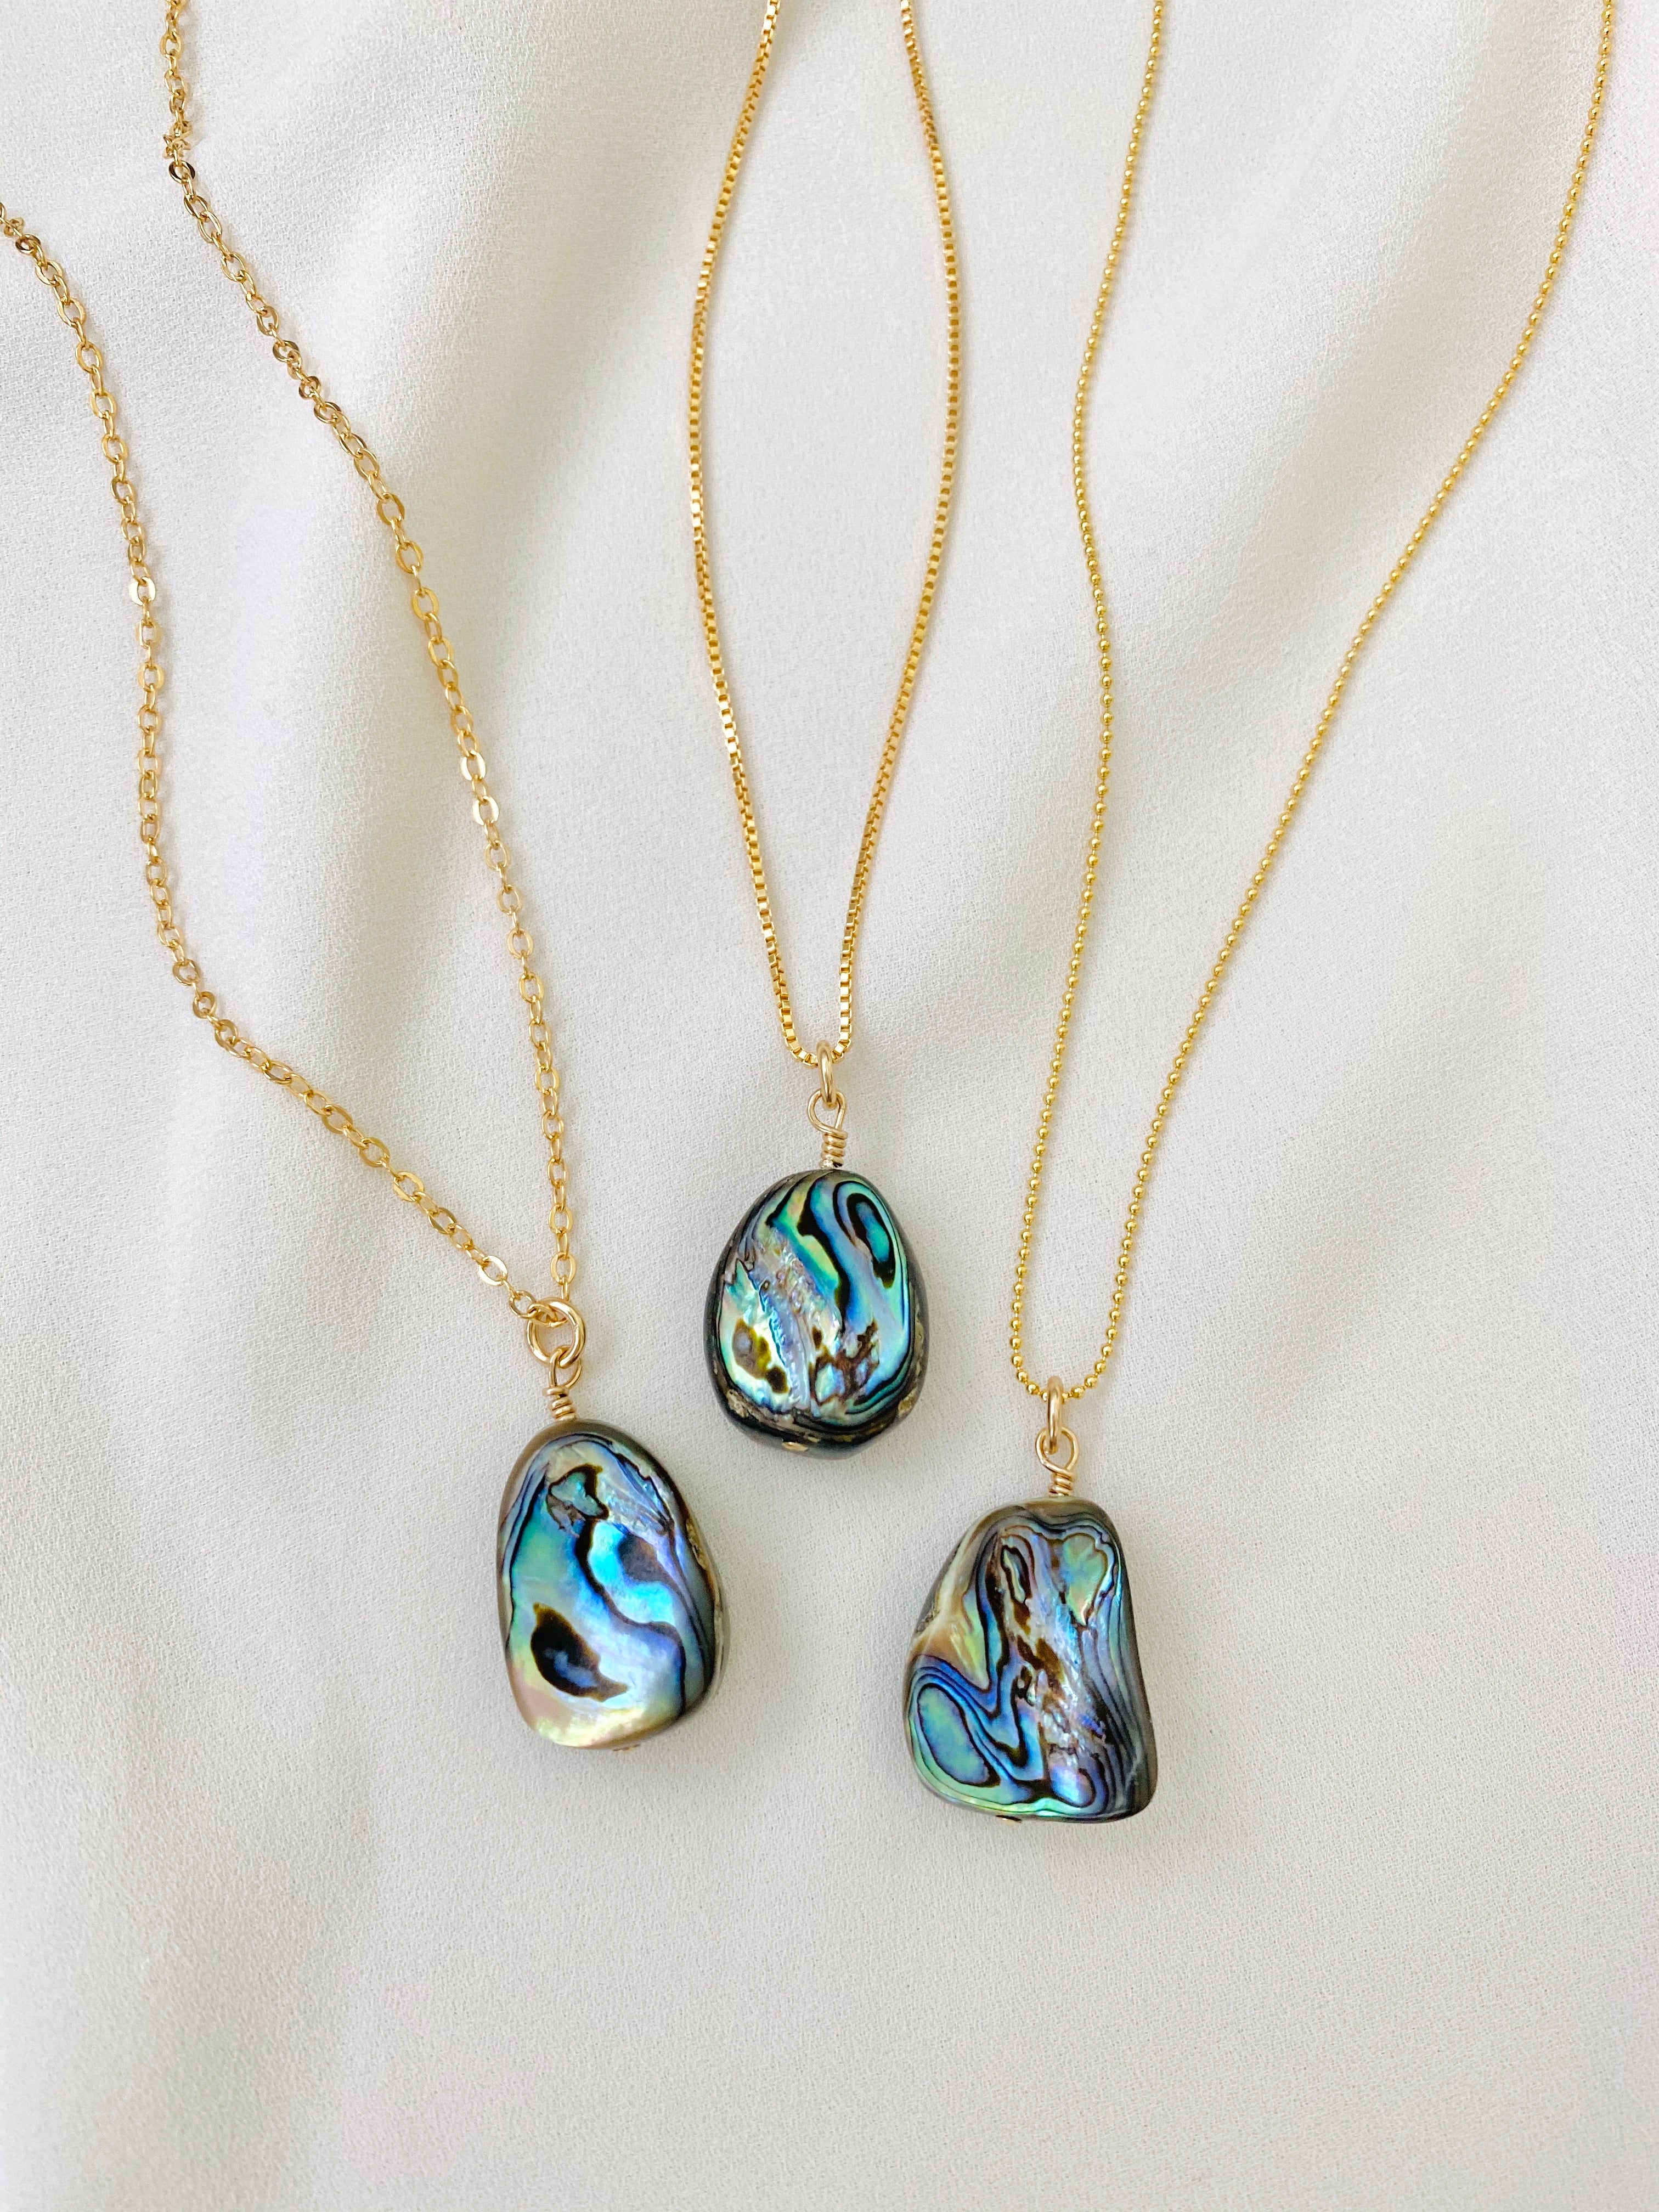 Real Abalone Shell Pendant Necklace - Gold Filled Chain